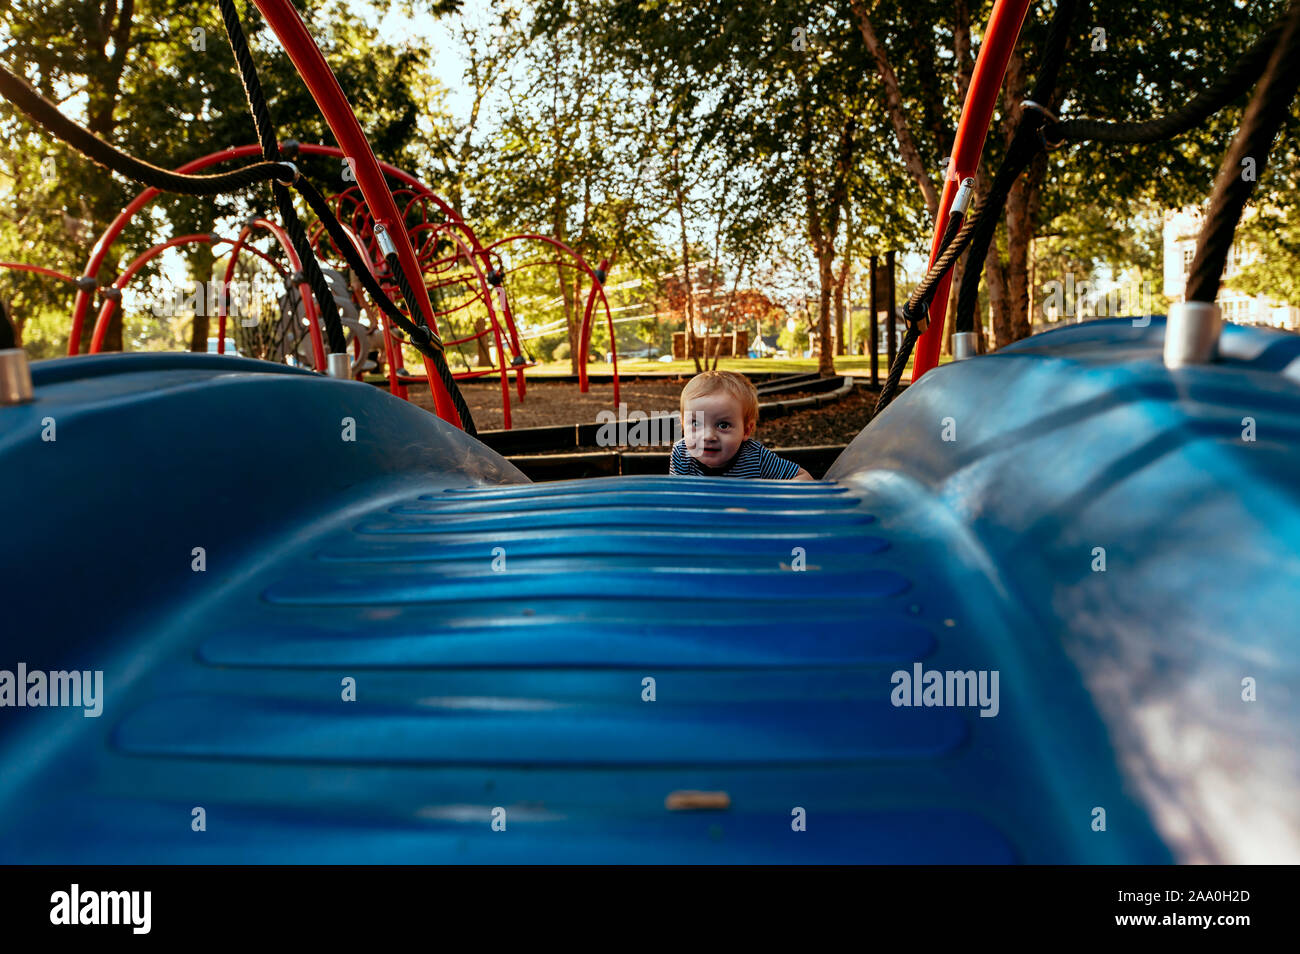 Baby boy climbing blue playground equipment at park with trees. Stock Photo